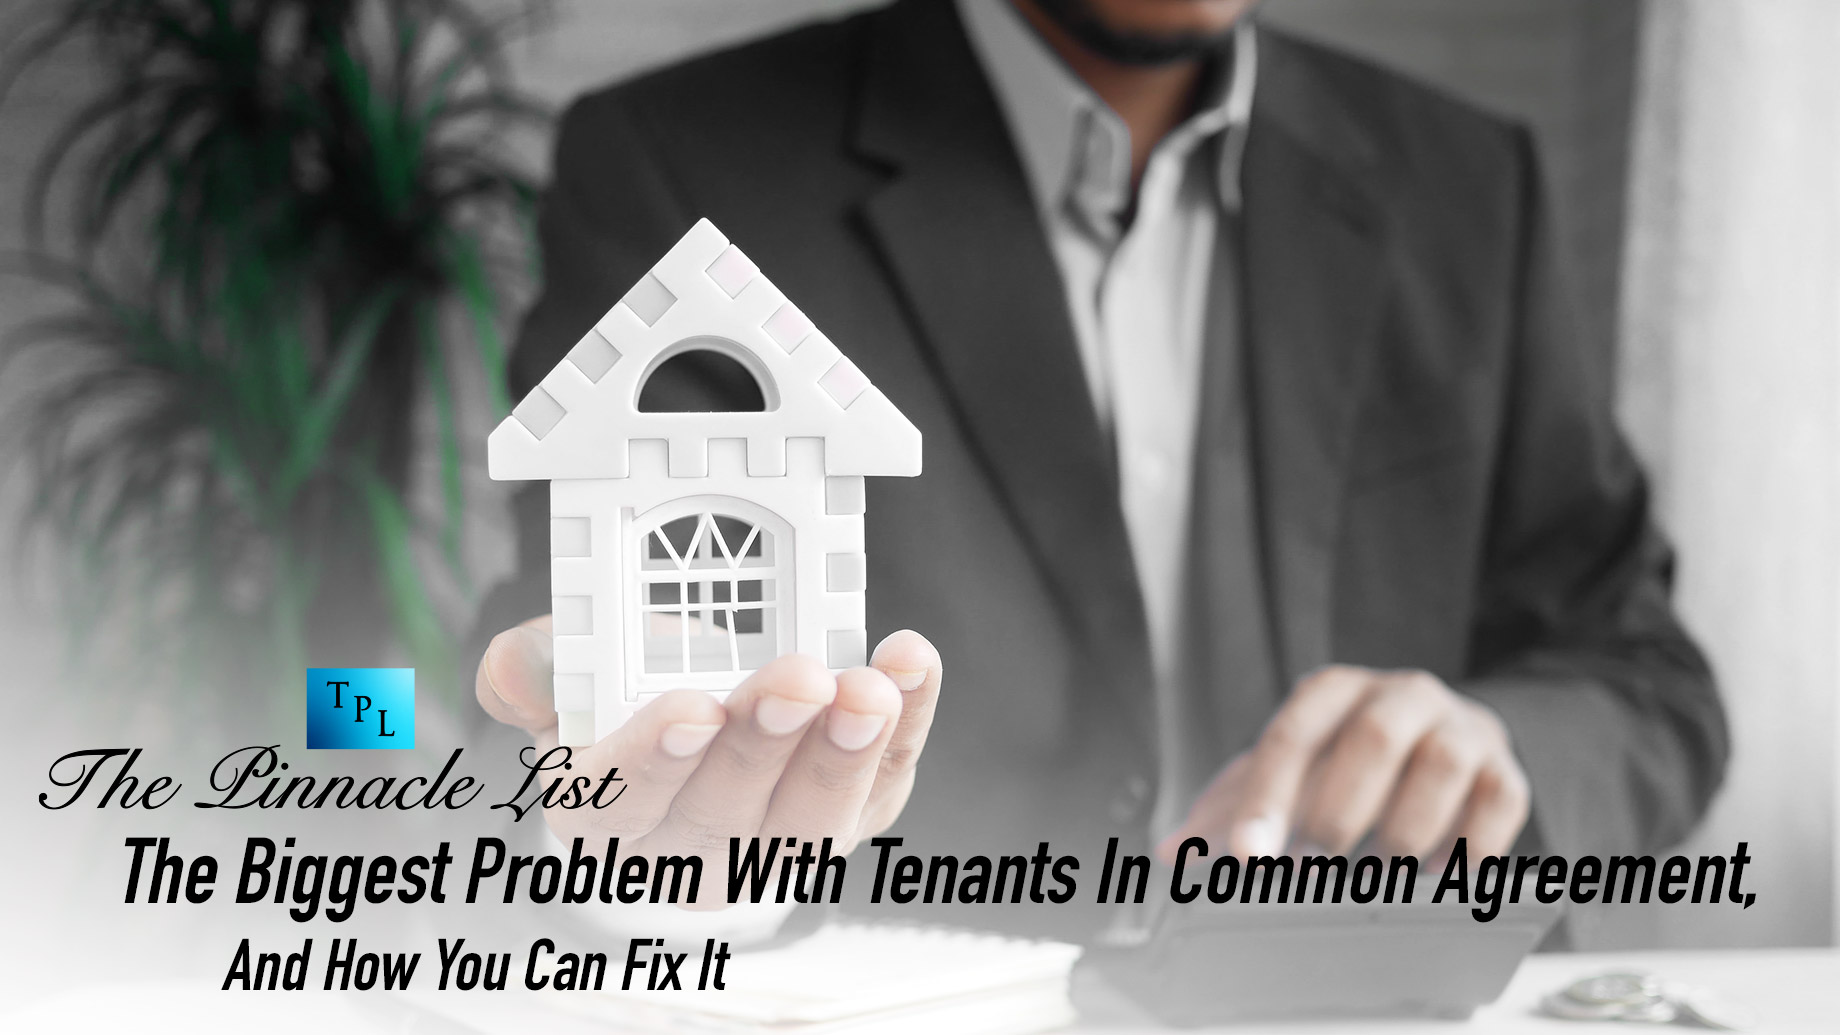 The Biggest Problem With Tenants In Common Agreement, And How You Can Fix It